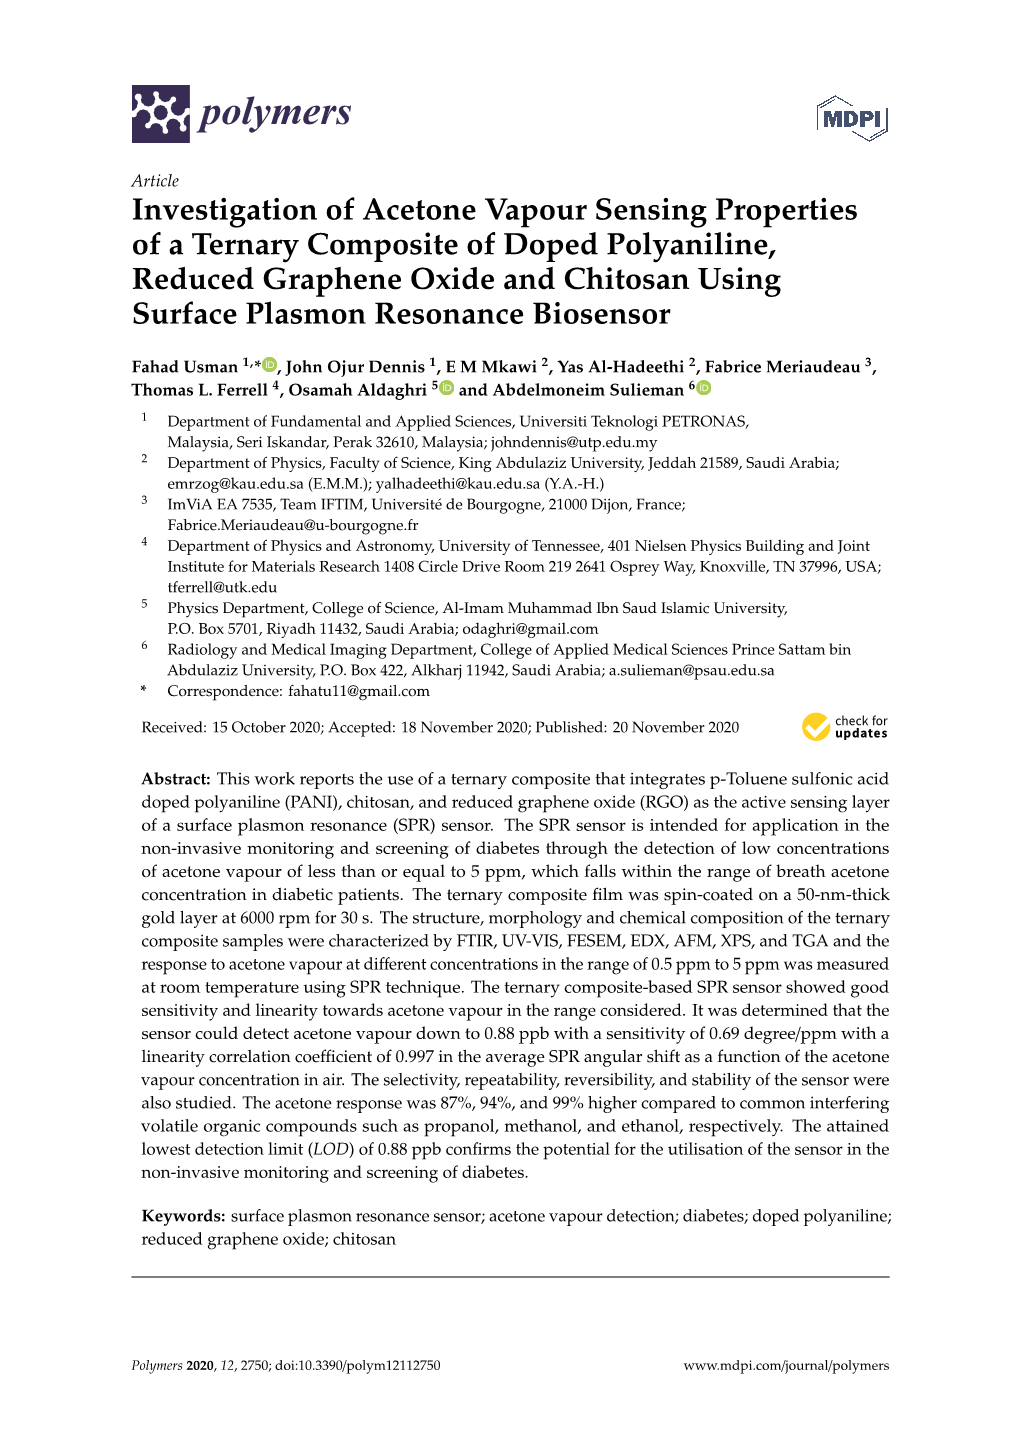 Investigation of Acetone Vapour Sensing Properties of a Ternary